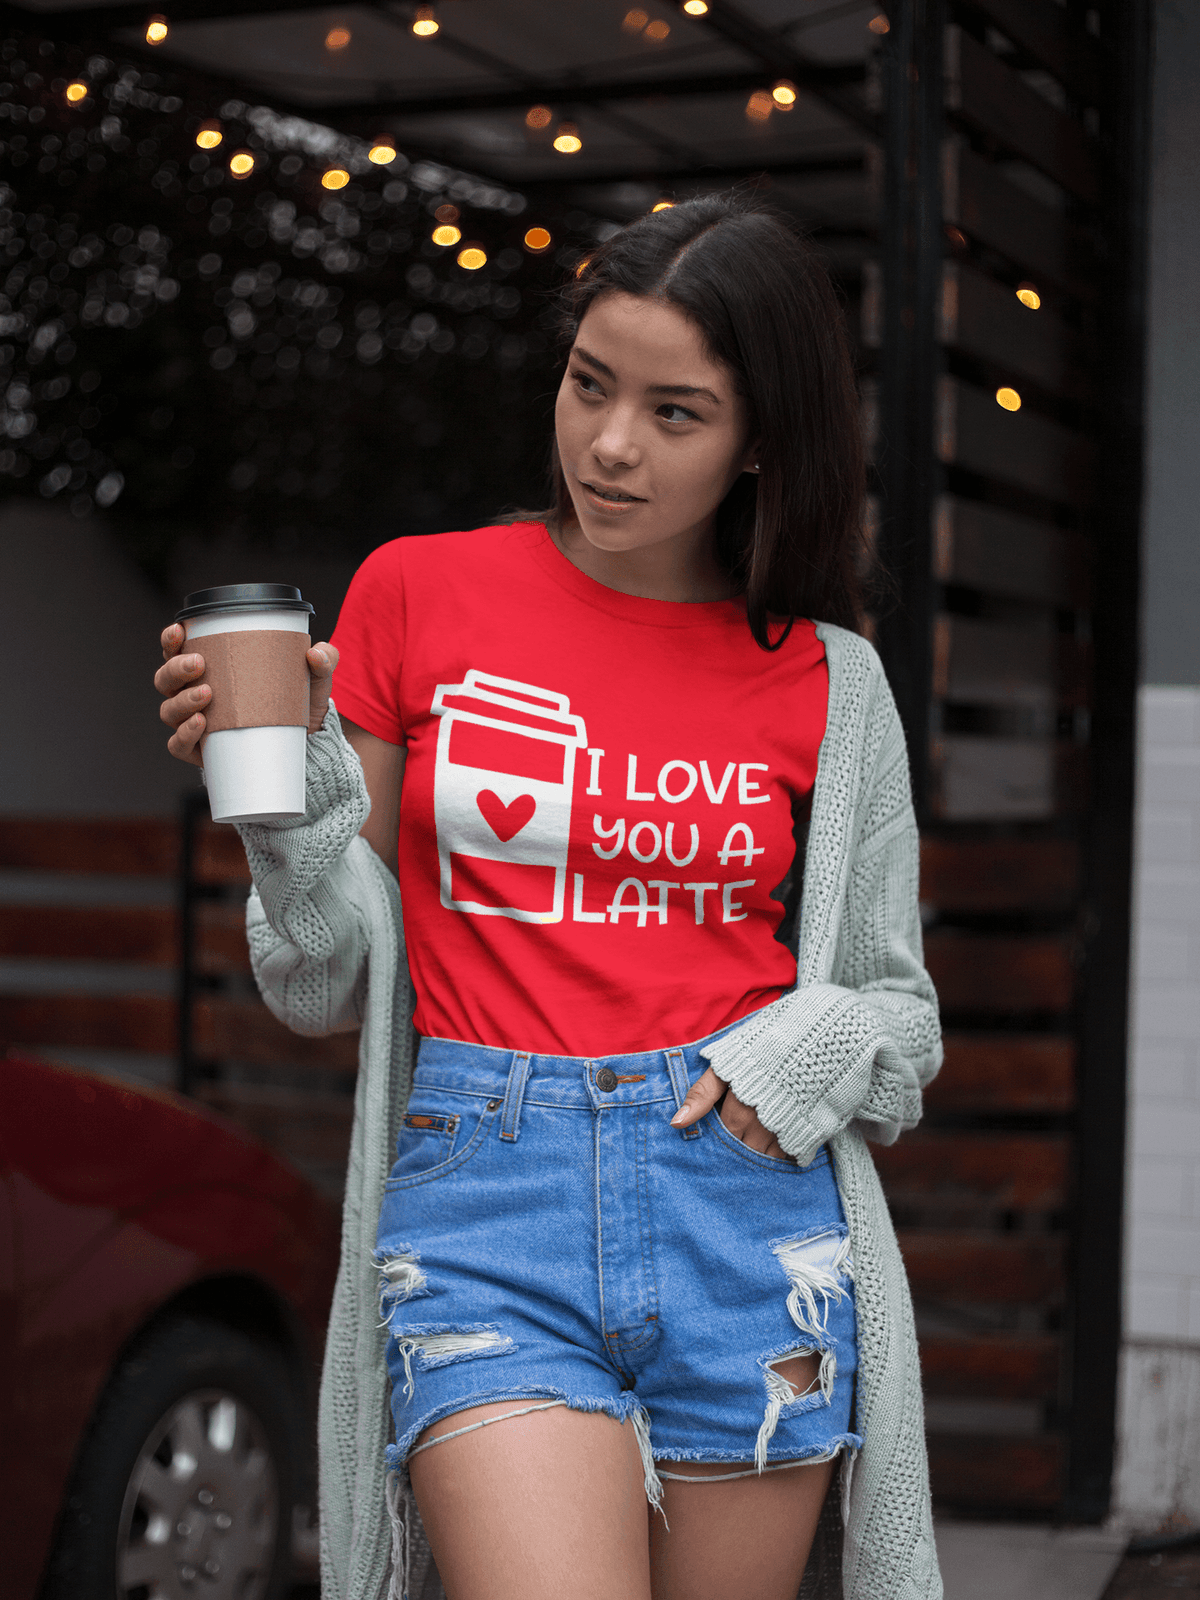 I LOVE YOU A LATTE T-shirt-Regular Fit Tee-StylinArts